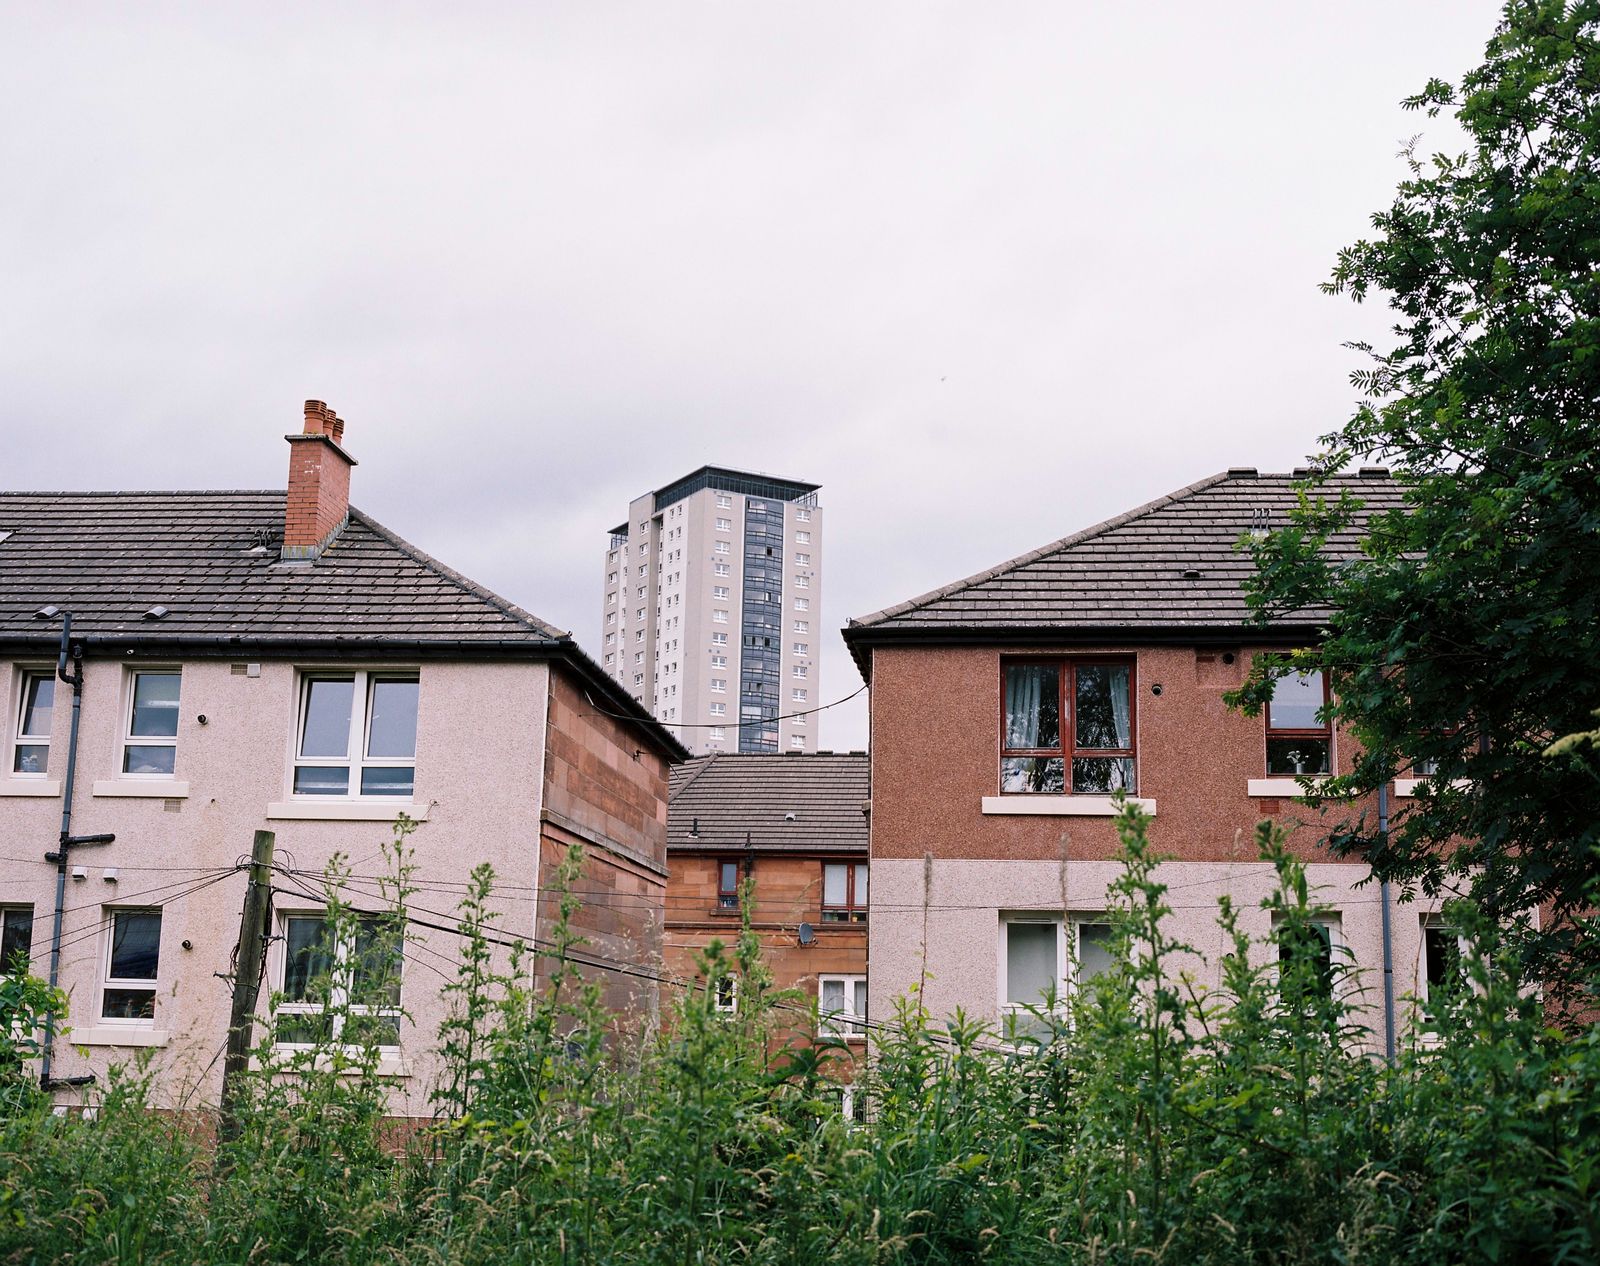 © Kirsty Mackay - Three stages of housing - from tenement to high rise to new build.